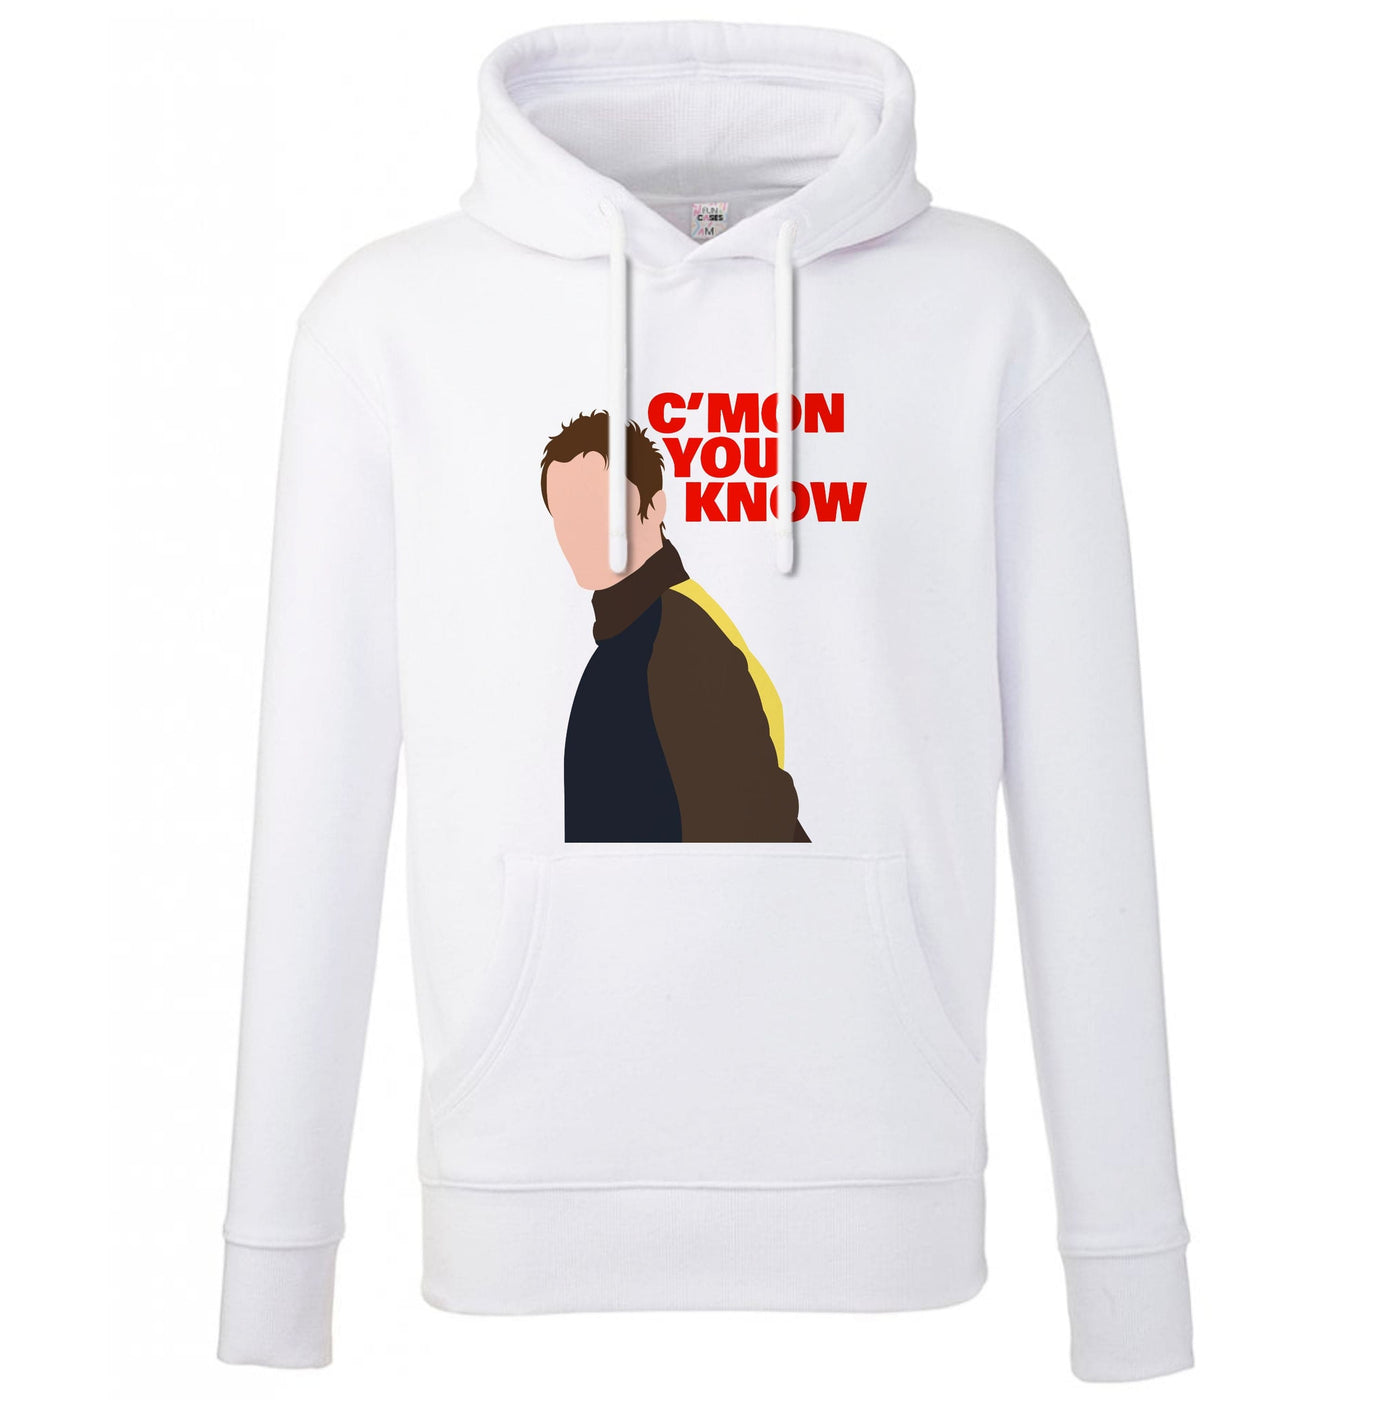 C'mon You Know - Festival Hoodie